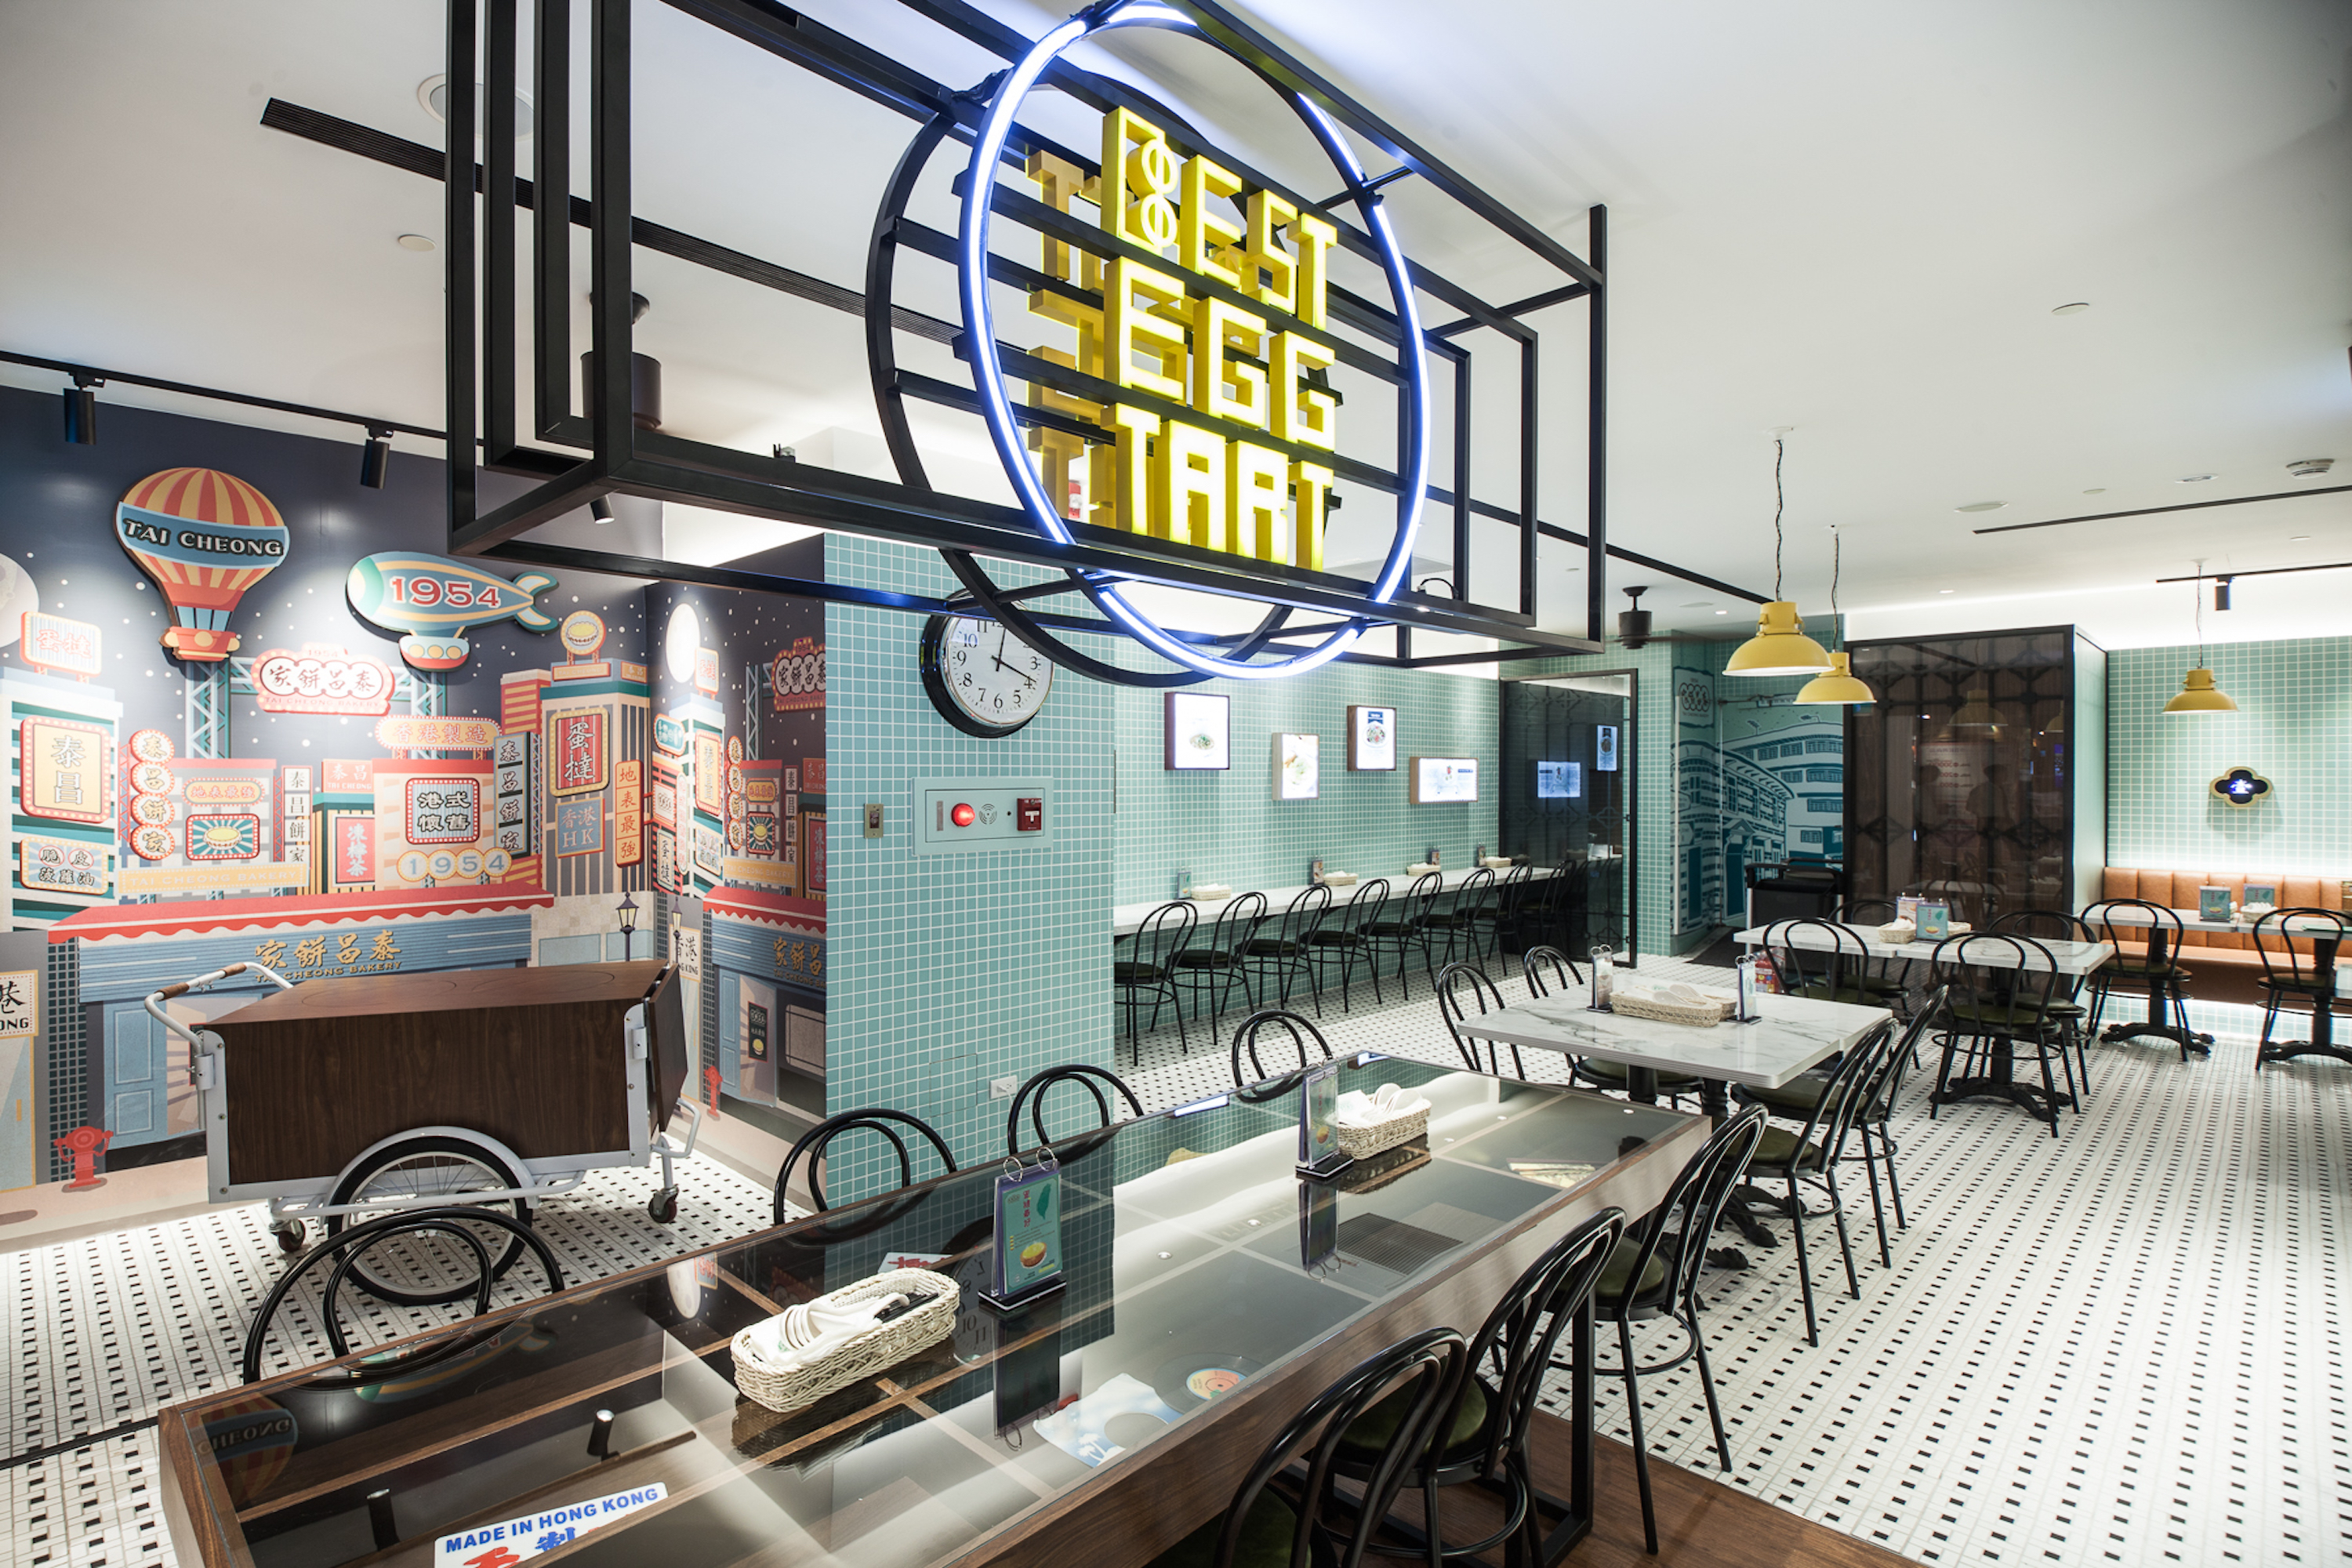 SSP strengthens Tai Cheong Bakery partnership with new Taipei City Hall Station outlet